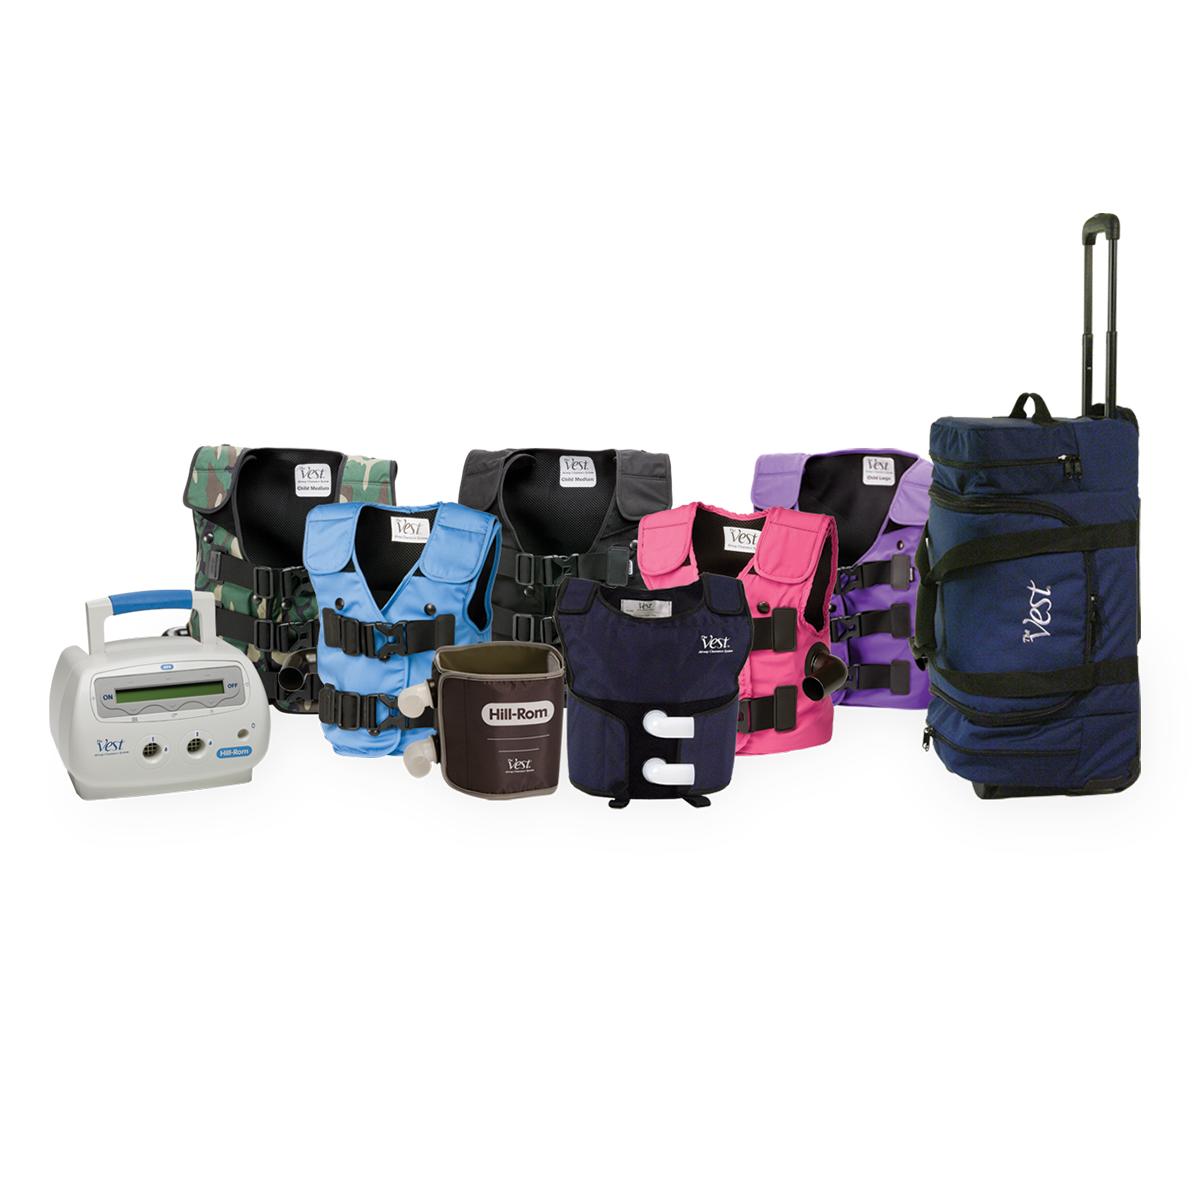 The Vest System, Model 105, collage of vests in different styles and colours, with control unit and bag